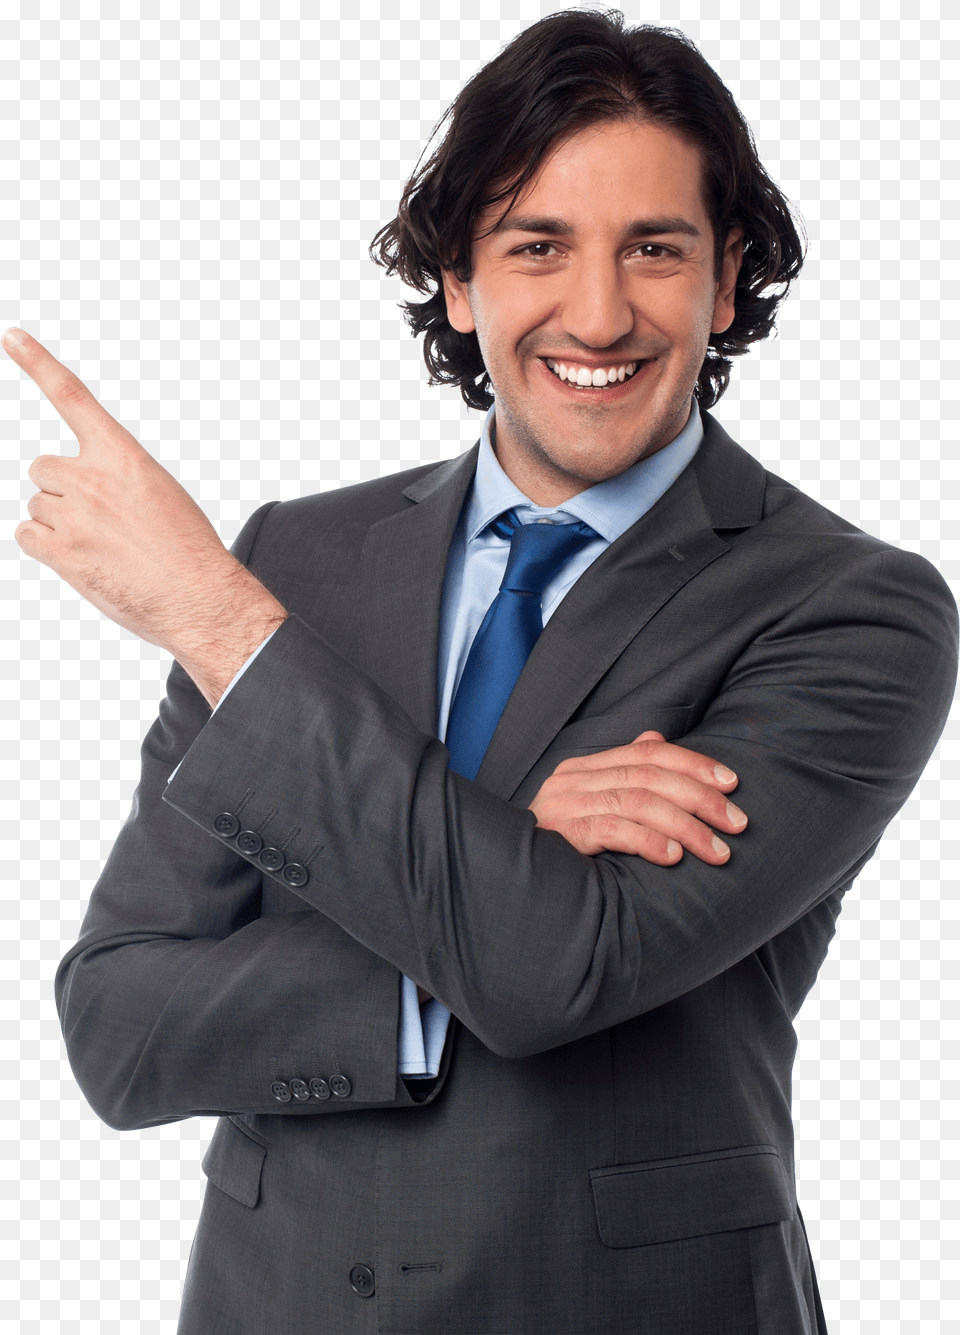 Man In Suit Pointing Free Transparent Png